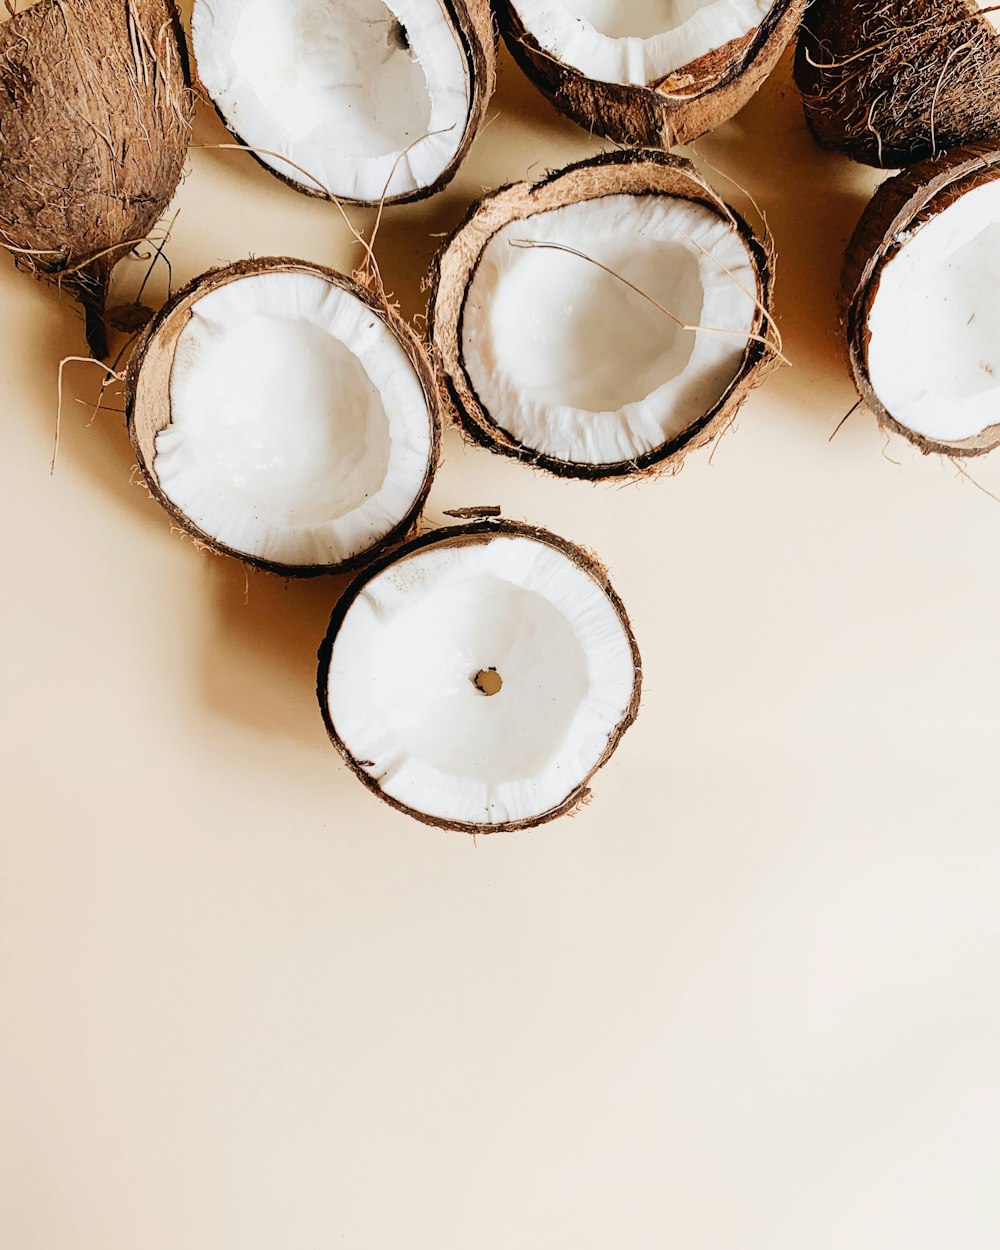 coconuts on white surface